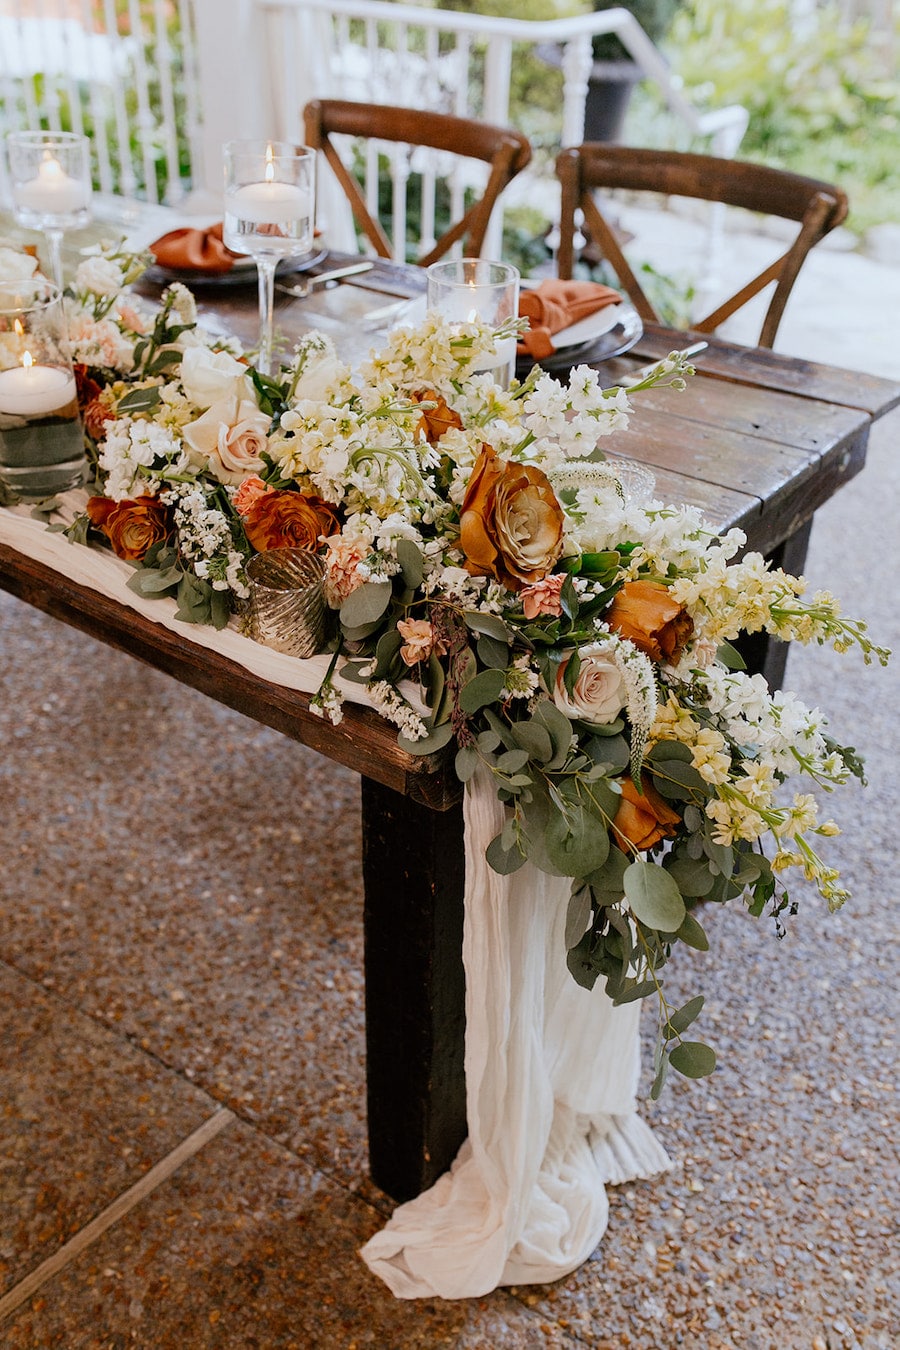 * Get inspired by this neutral wedding color palette from Nashville garden wedding venue CJ's Off the Square. 